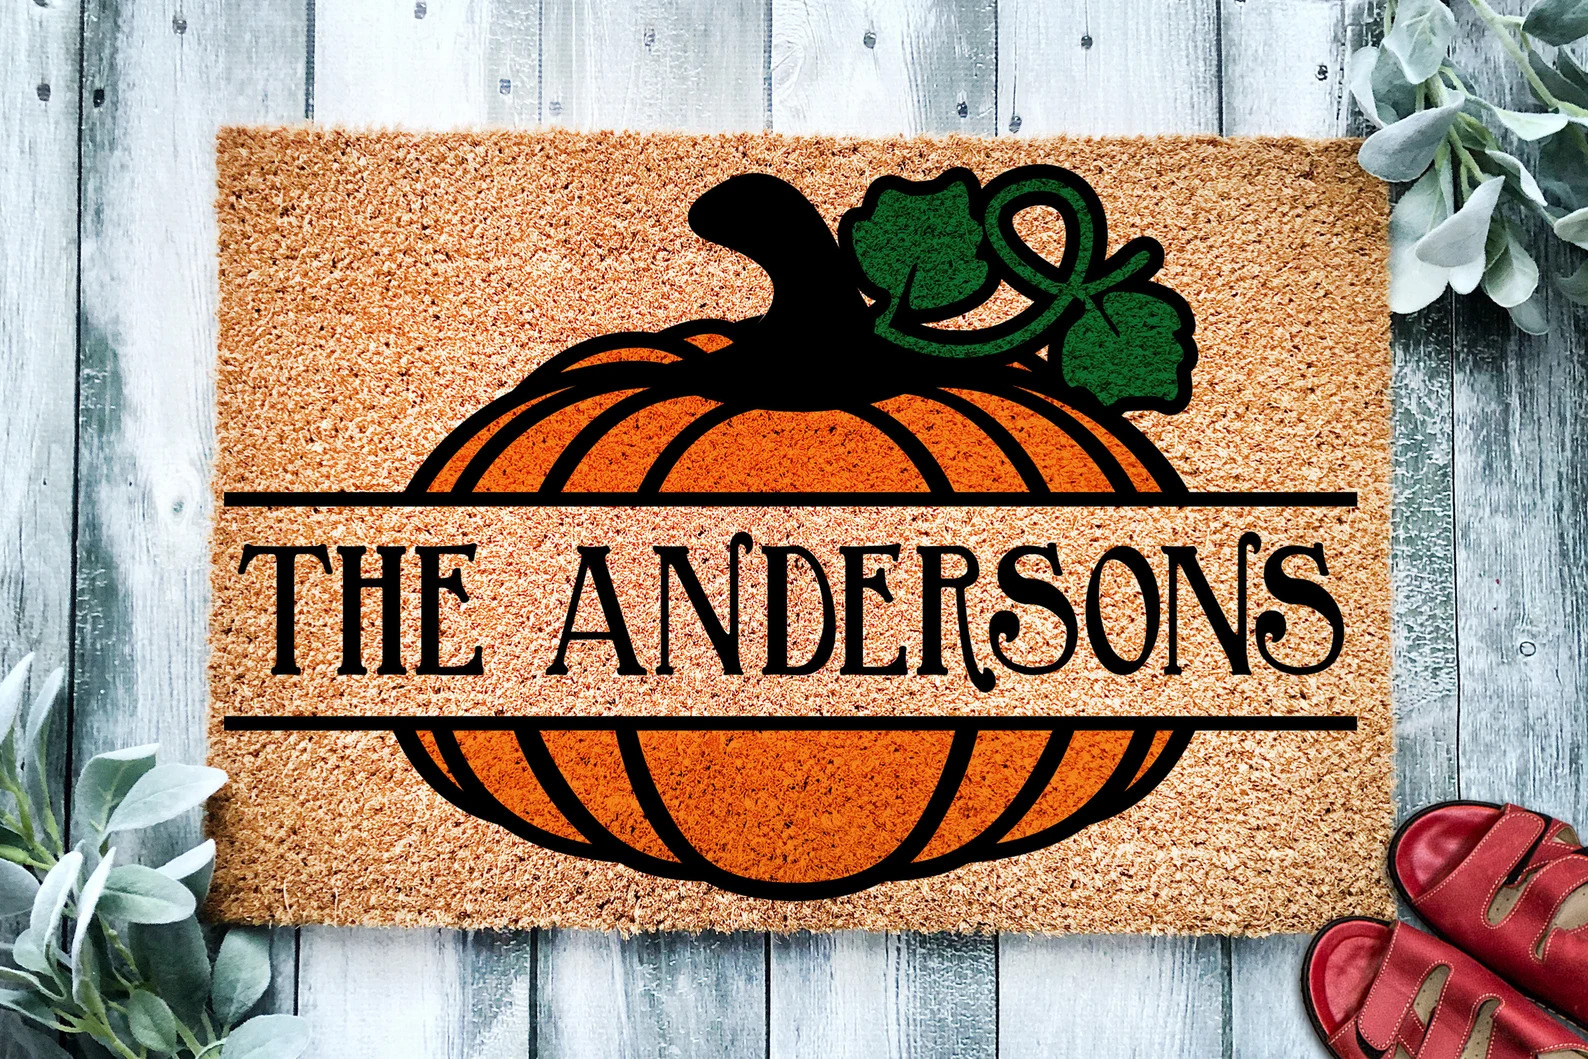 15 Charming Fall Doormat Designs That Will Welcome You With The Season's Greetings